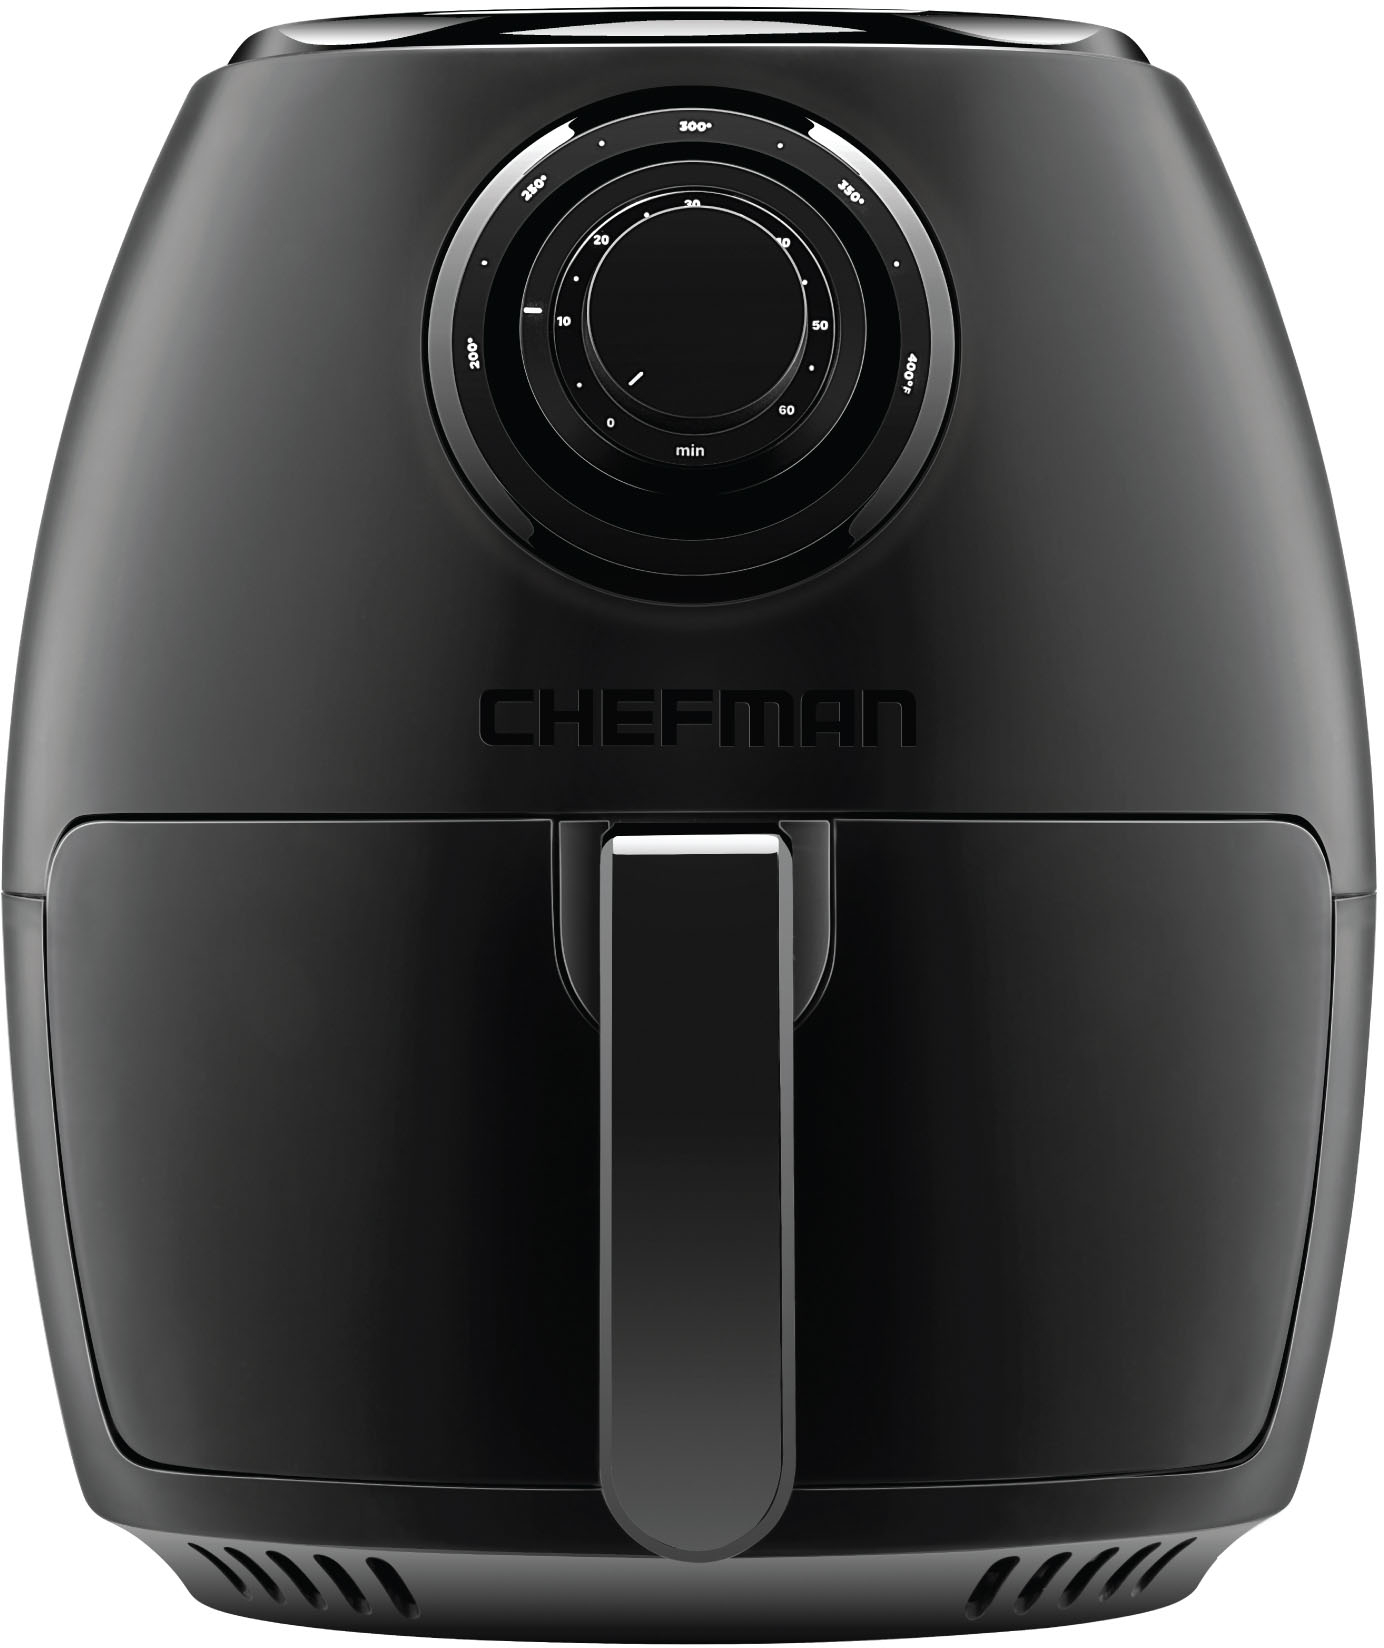 Chefman TurboFry 3.6 Qt. Analog Air Fryer, Dual Dial Control – Black – Just $29.99 at Best Buy